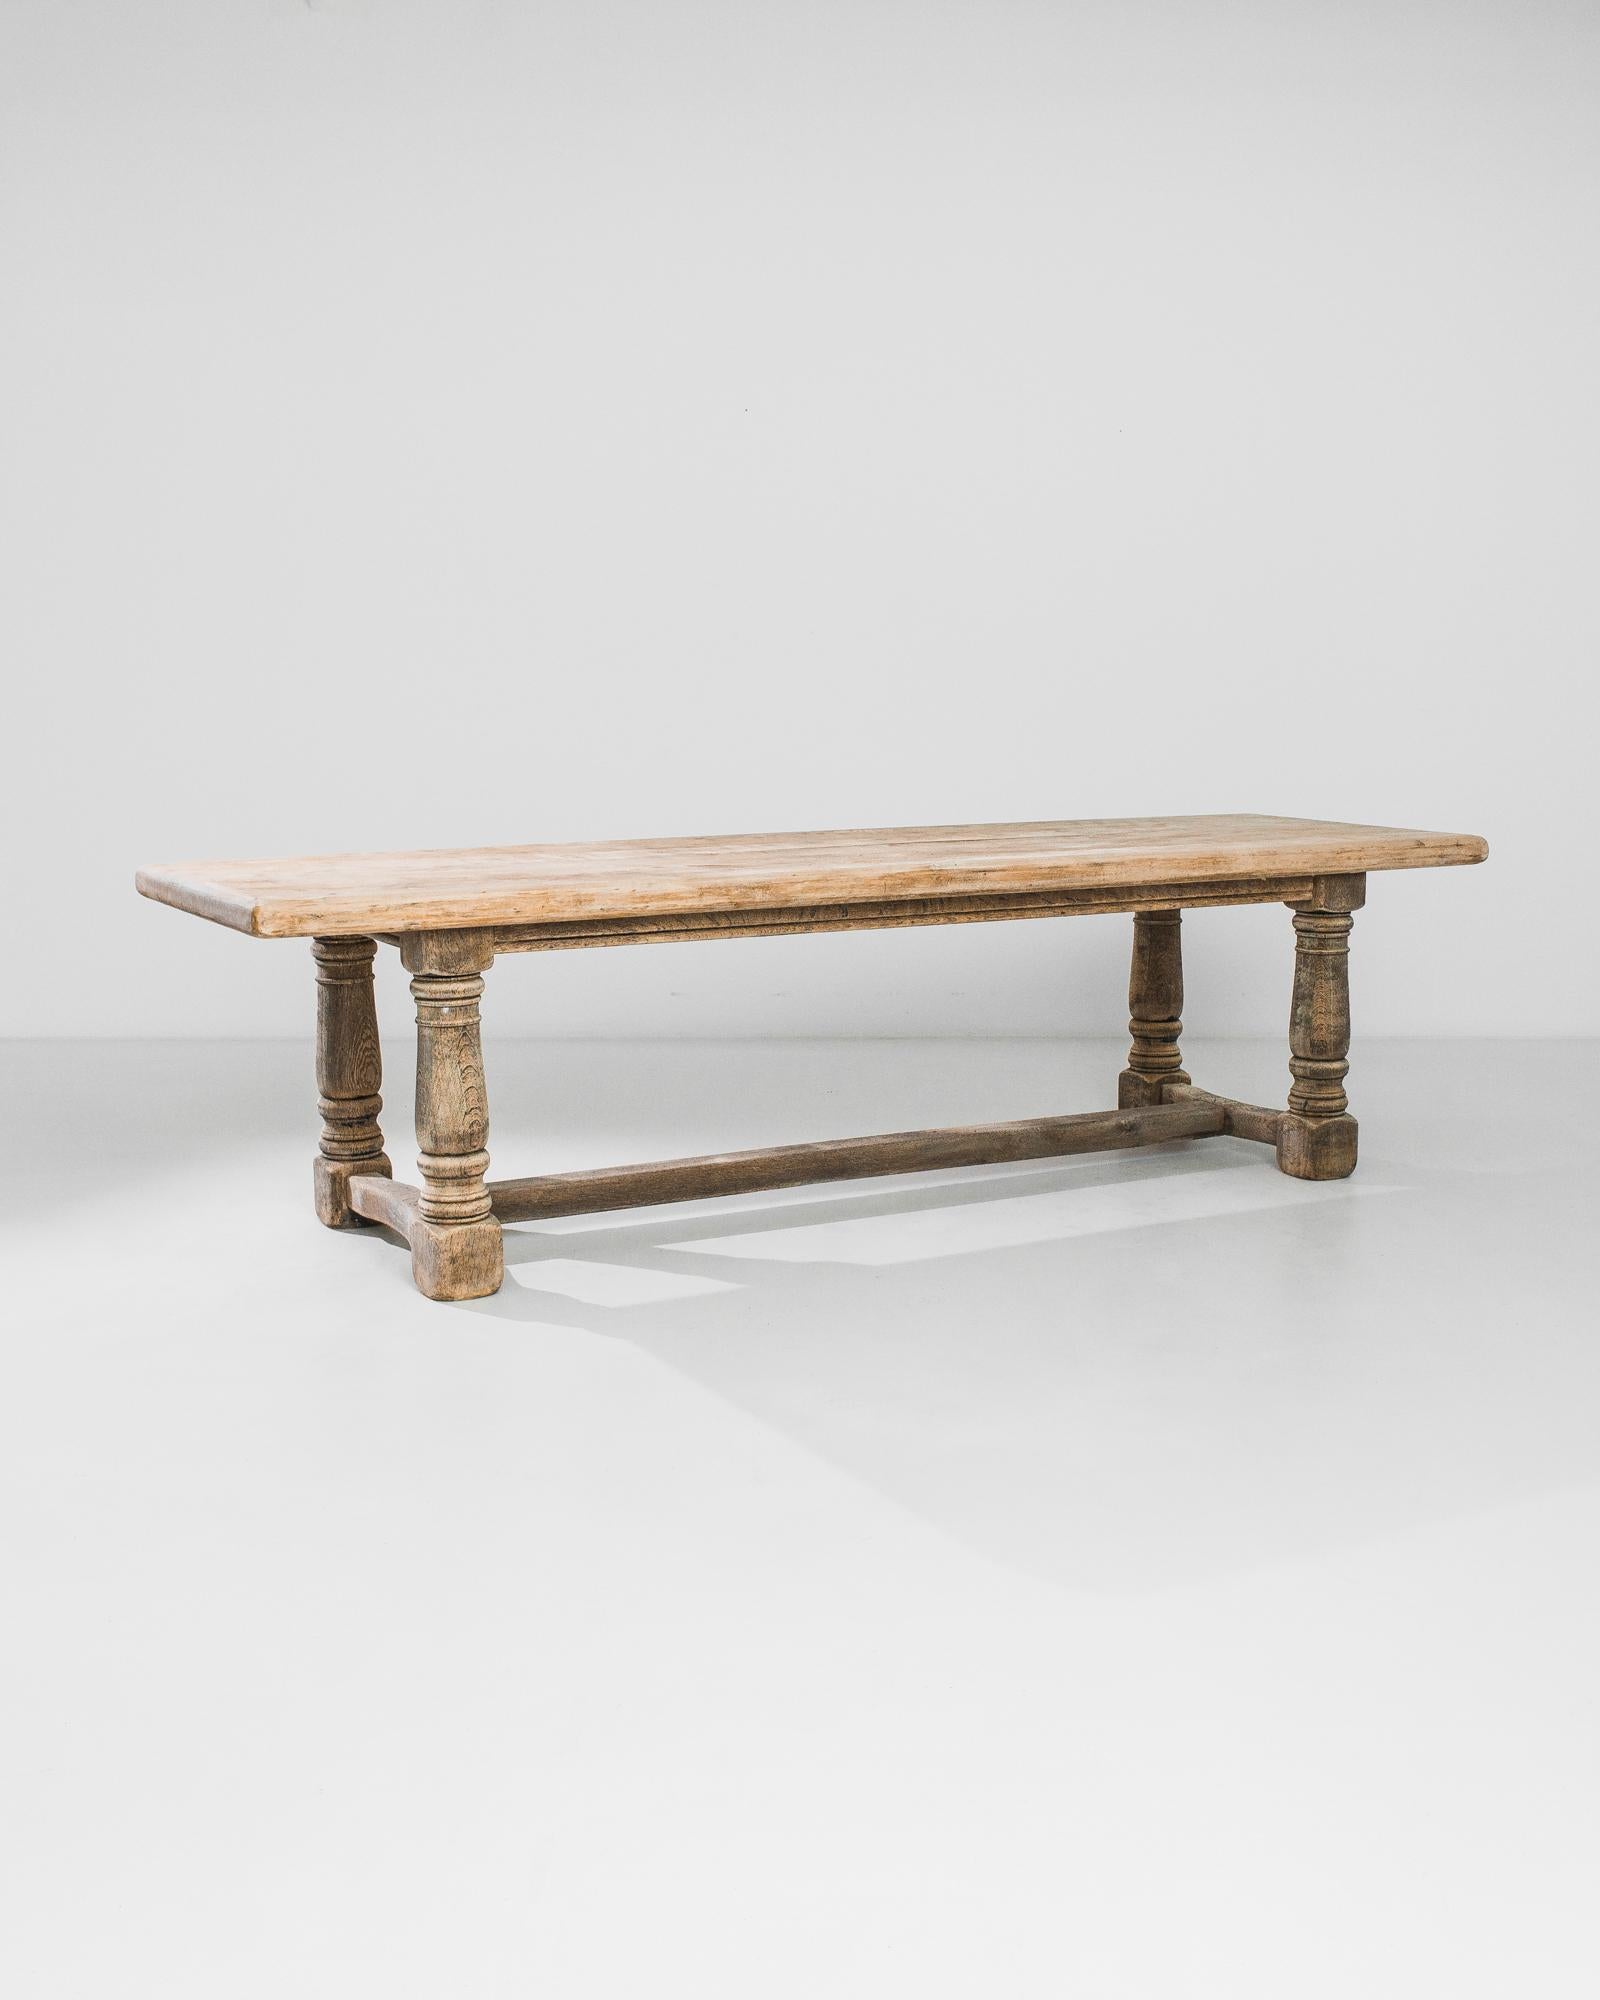 A dining table designed and crafted in Belgium circa 1970. Simple table top crafted out of oak is raised on firm baluster legs. The table’s height —it’s only two and a half feet tall —permits the use of the table as a bench. This curious mid-century